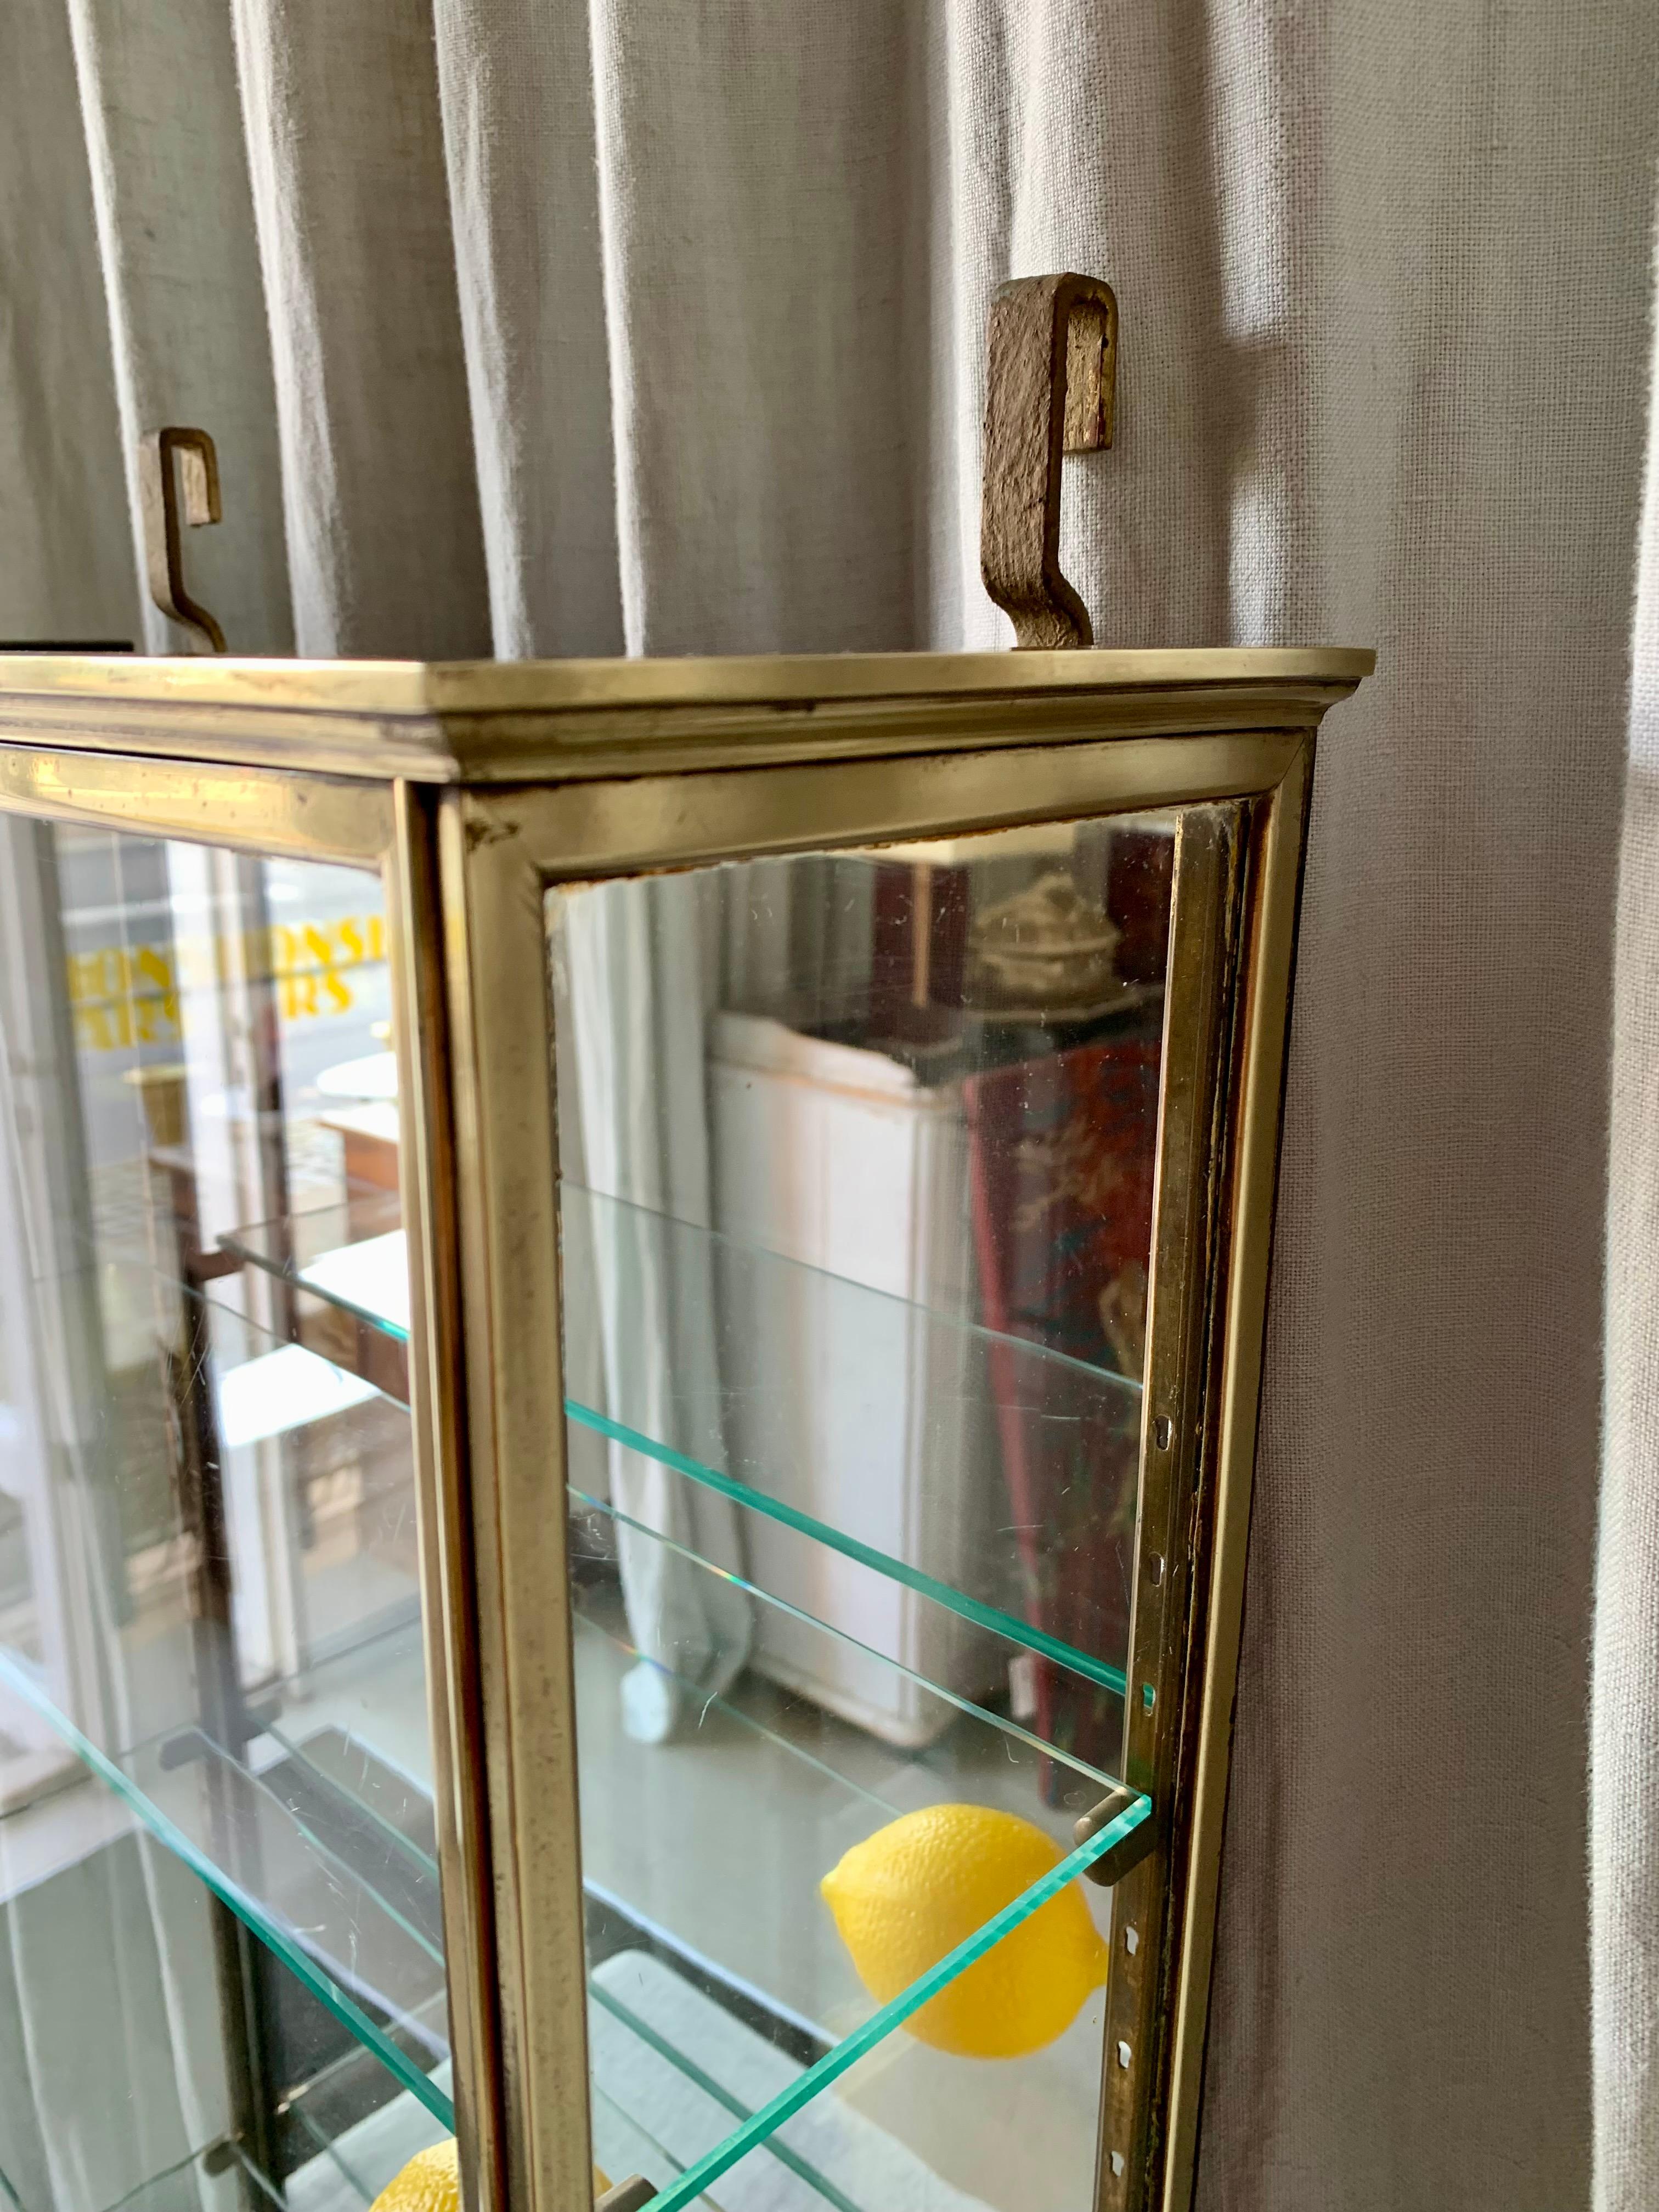 Antique French Display Cabinet - Vitrine In Good Condition For Sale In Hellerup, DK